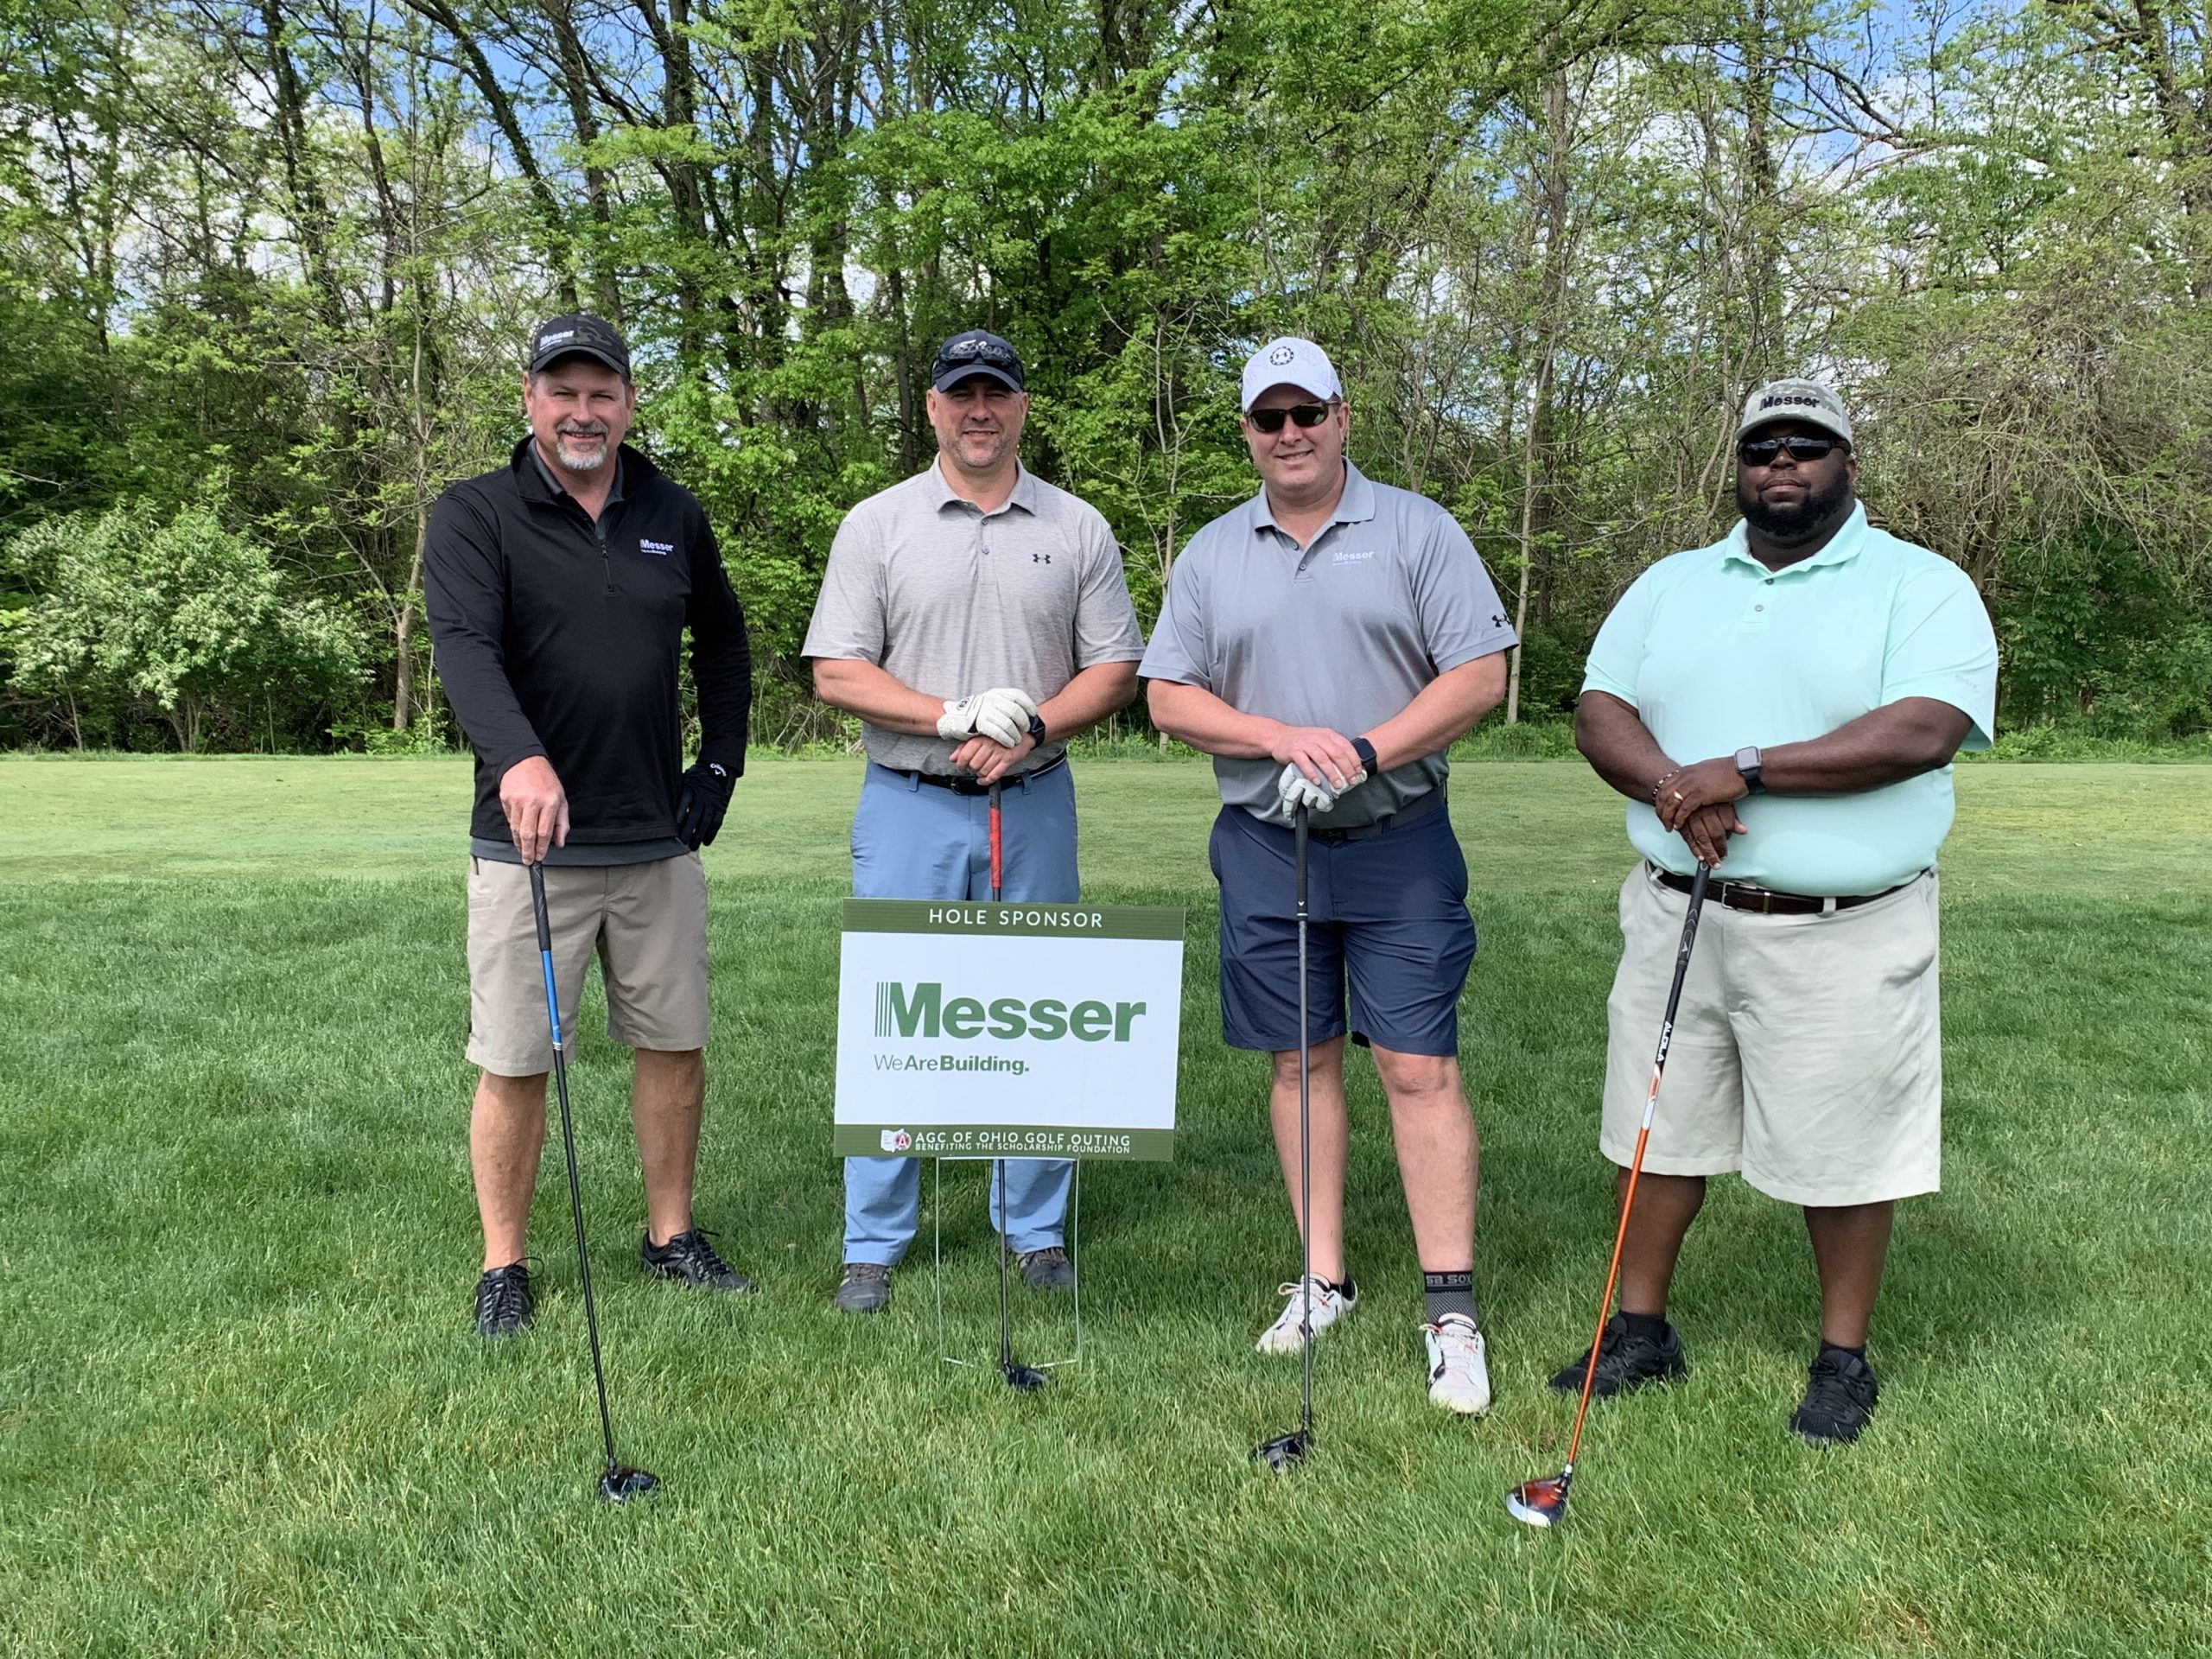 Messer Construction Company employees on the golf course in front of Messer sponsor signage